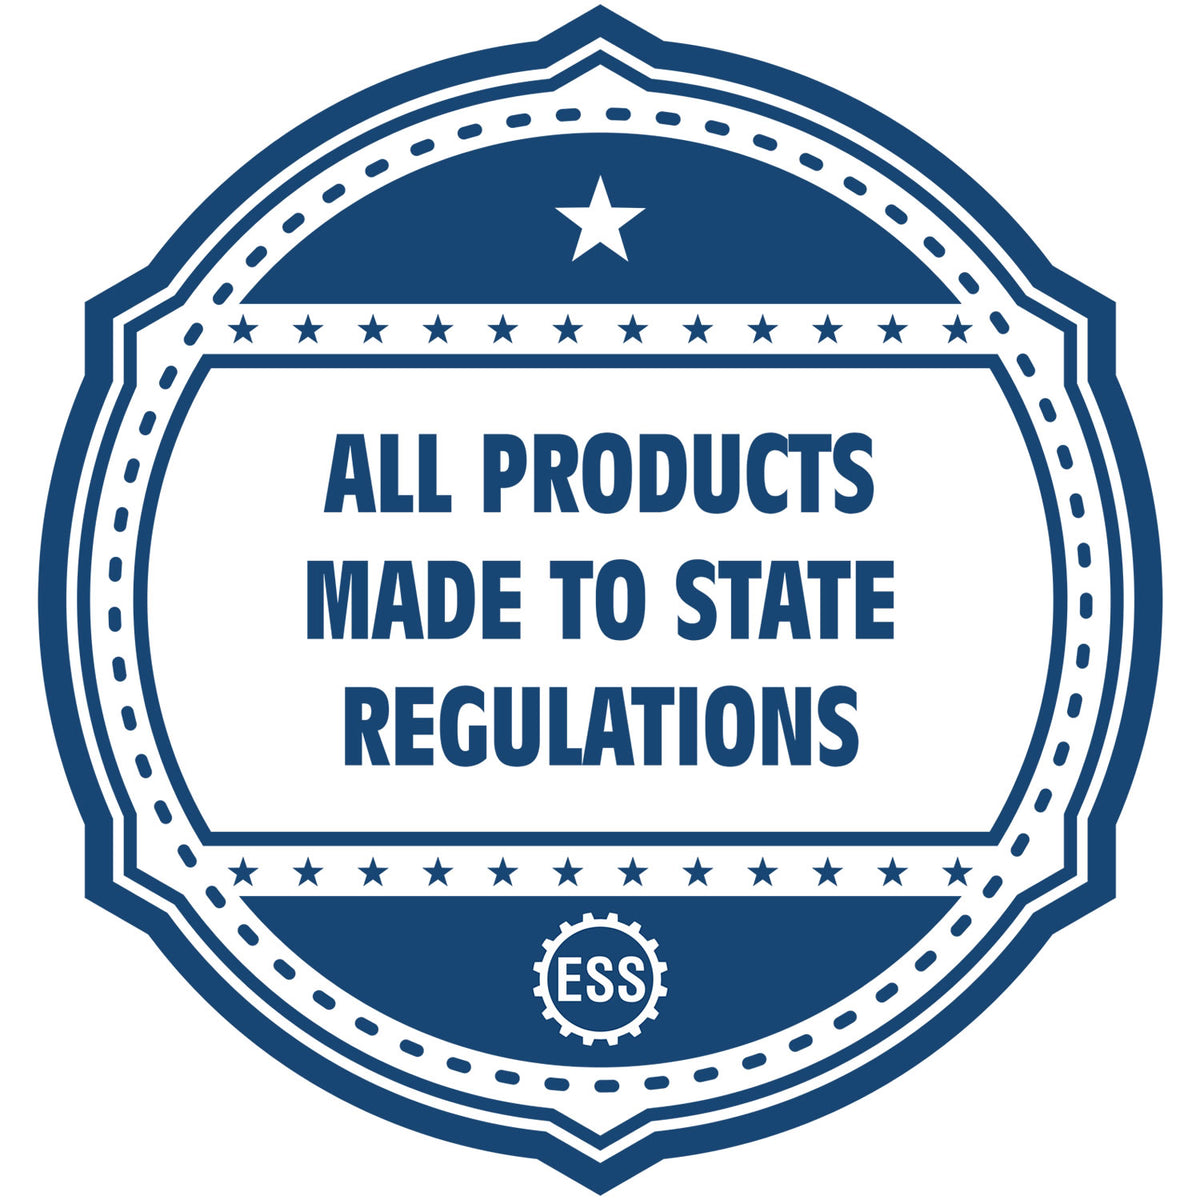 An icon or badge element for the Super Slim West Virginia Notary Public Stamp showing that this product is made in compliance with state regulations.